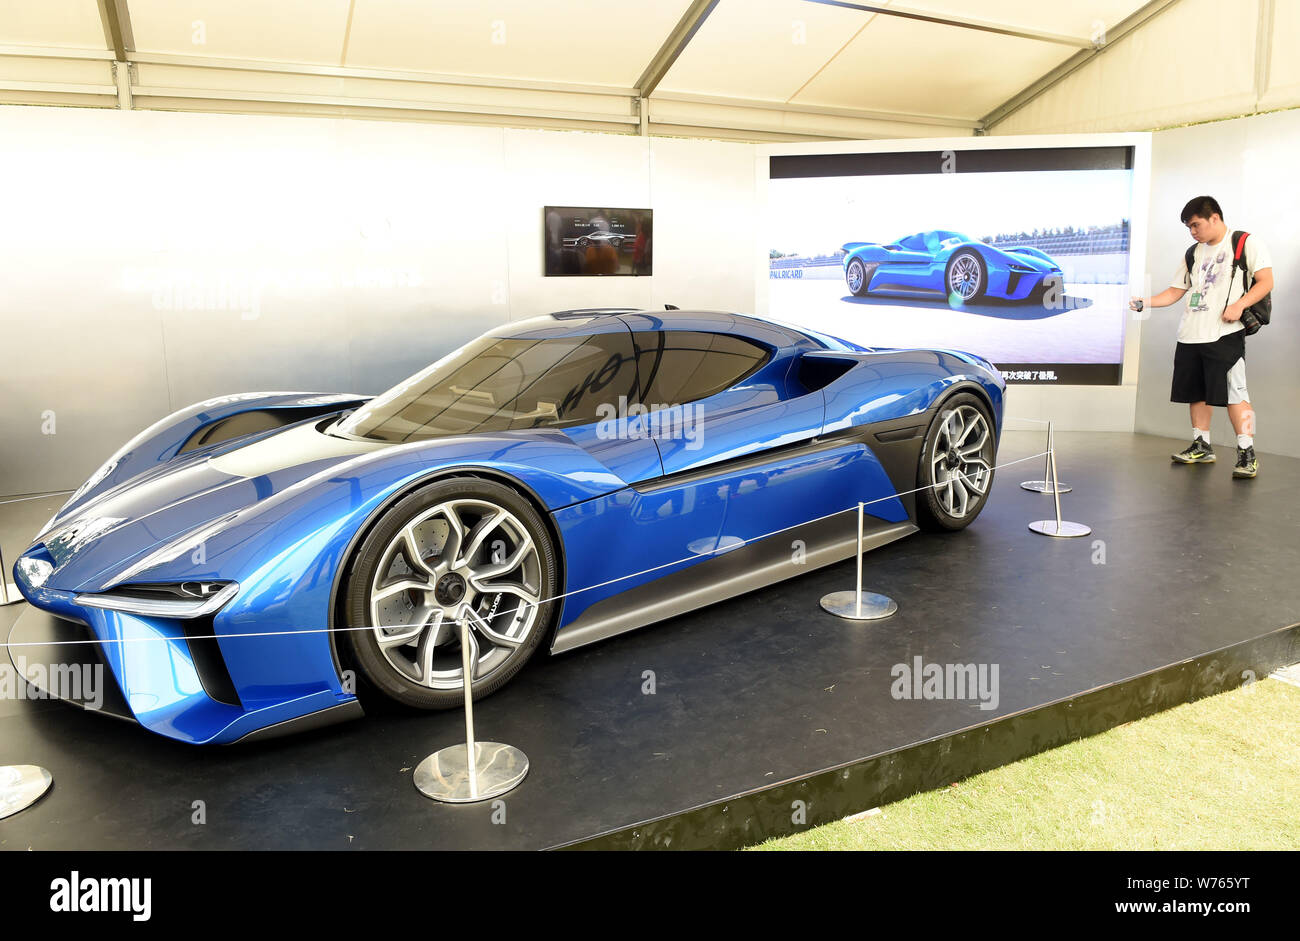 File A Nio Ep9 Nextev Sports Car Of Manufactured By Nio Assisted By Chinese Motor Racing Team Nextev Formula E Team Is On Display During The Secon Stock Photo Alamy